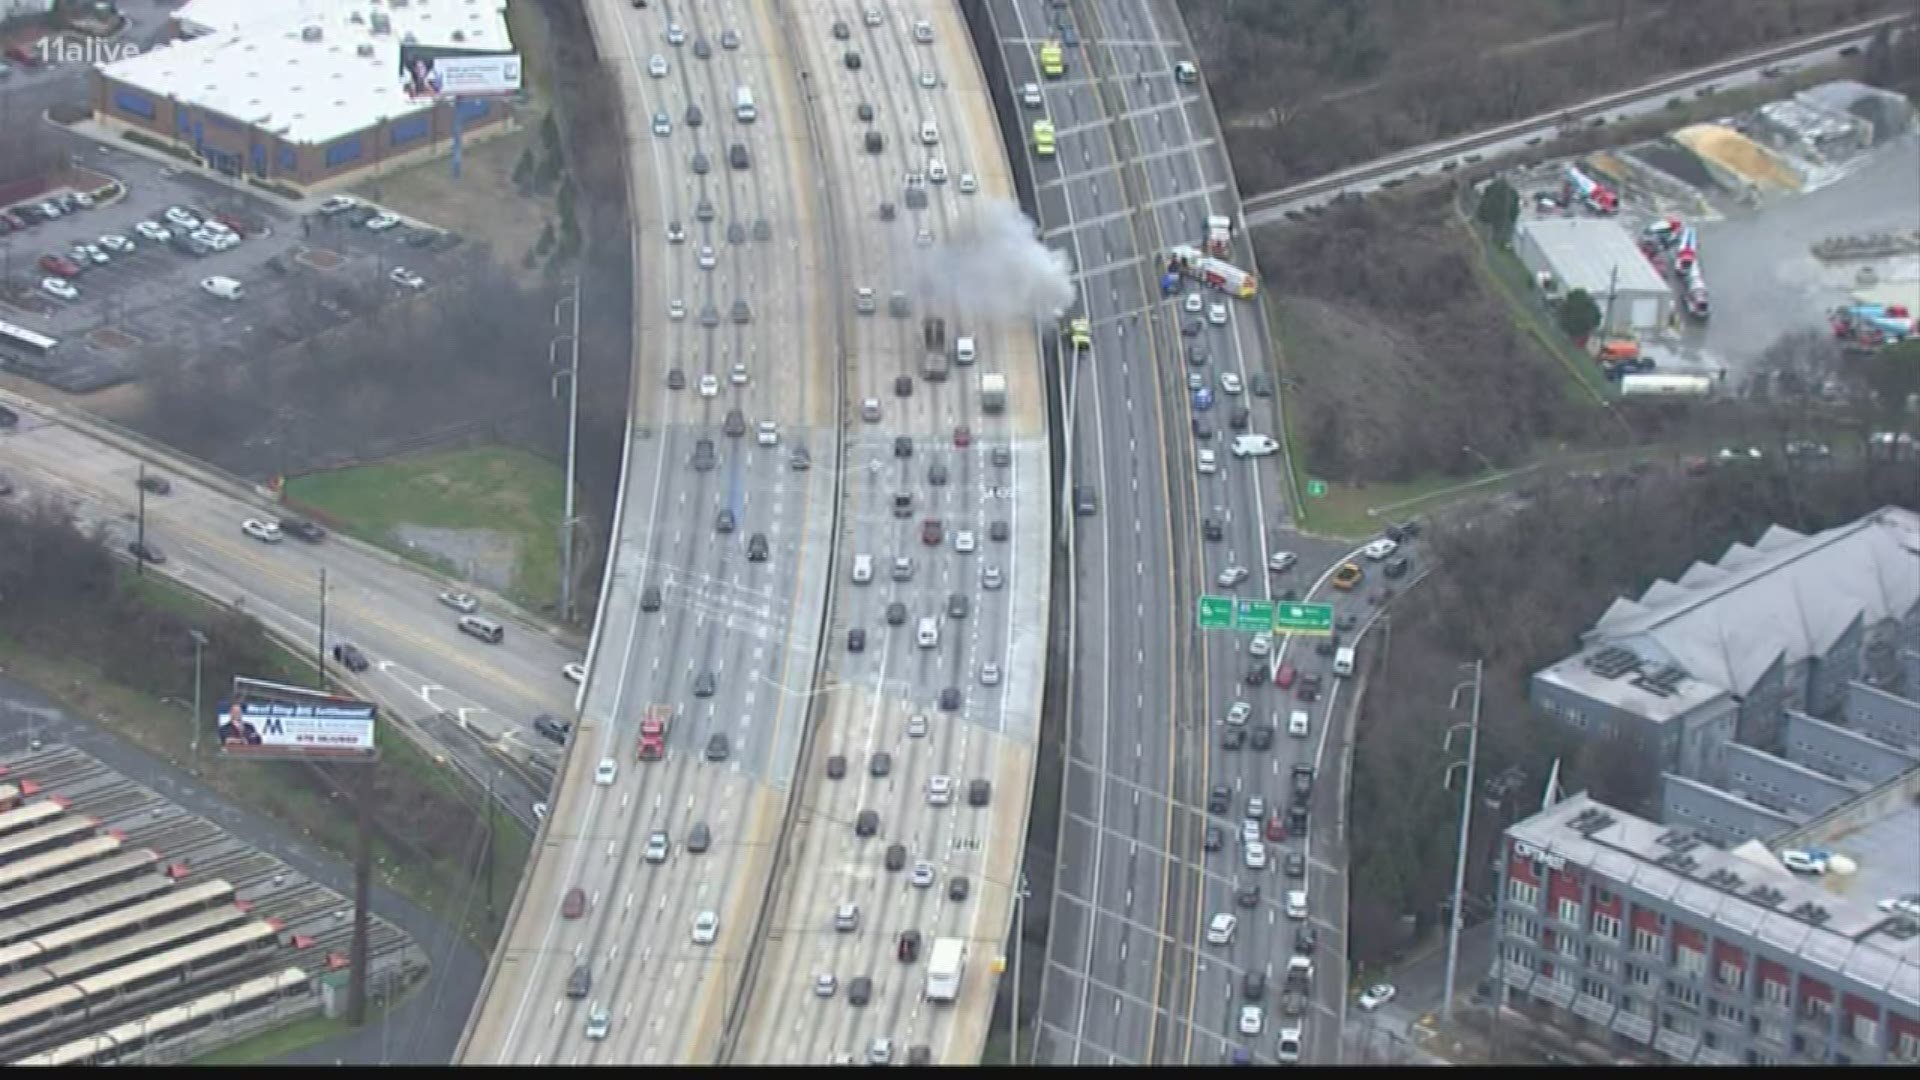 Smoke billowed out from below Interstate 85 in Atlanta yesterday, in a scene eerily reminiscent of the fire that collapsed a bridge along the highway nearly three ye